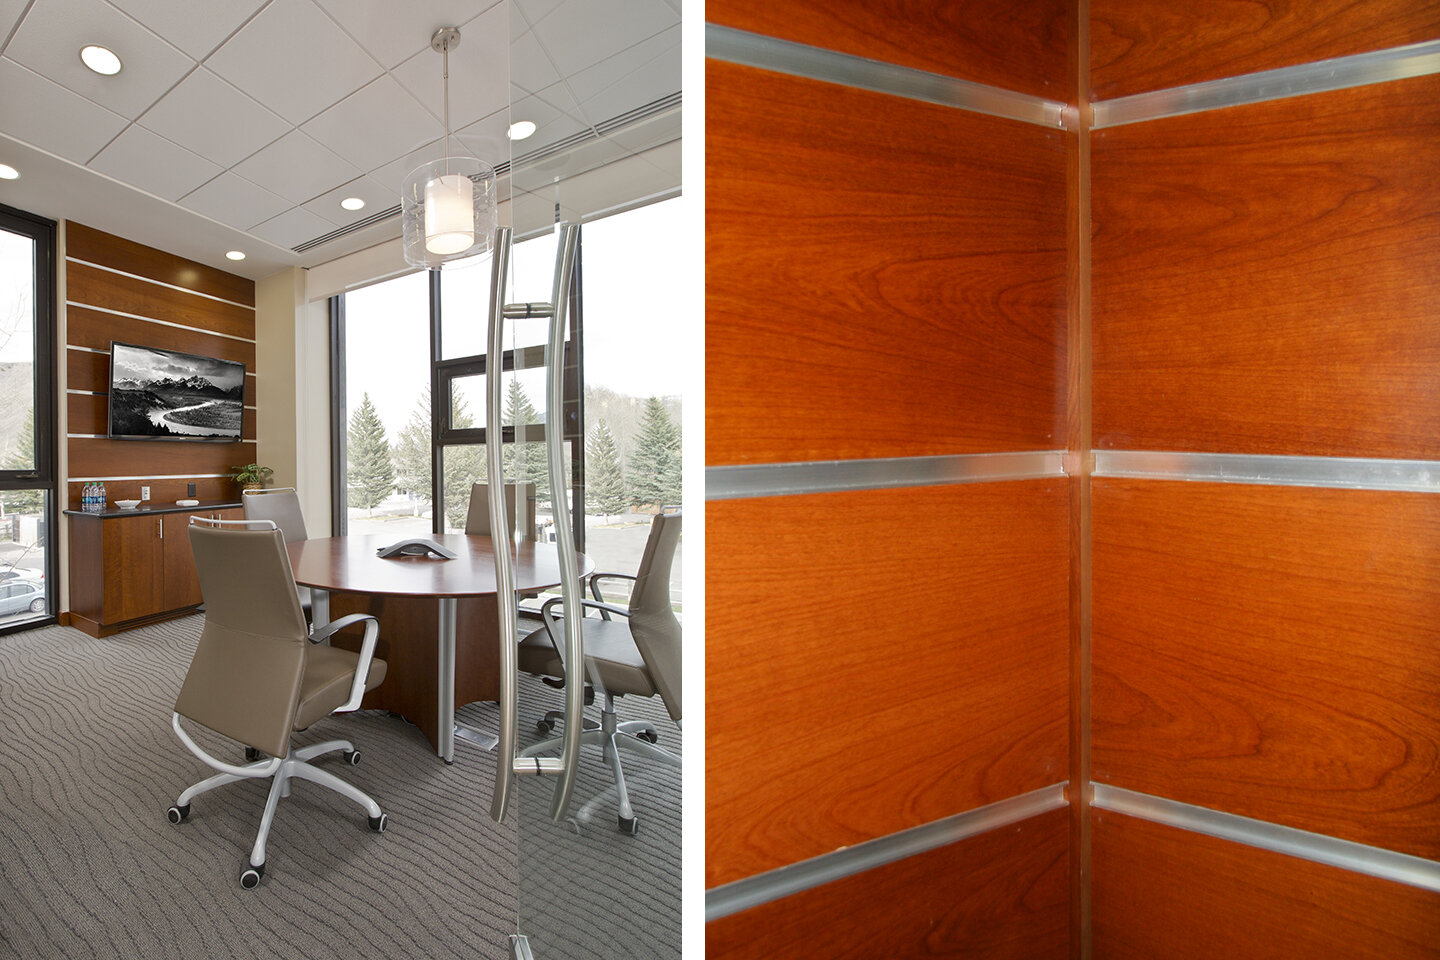 Meeting area and engineered wood paneling detail